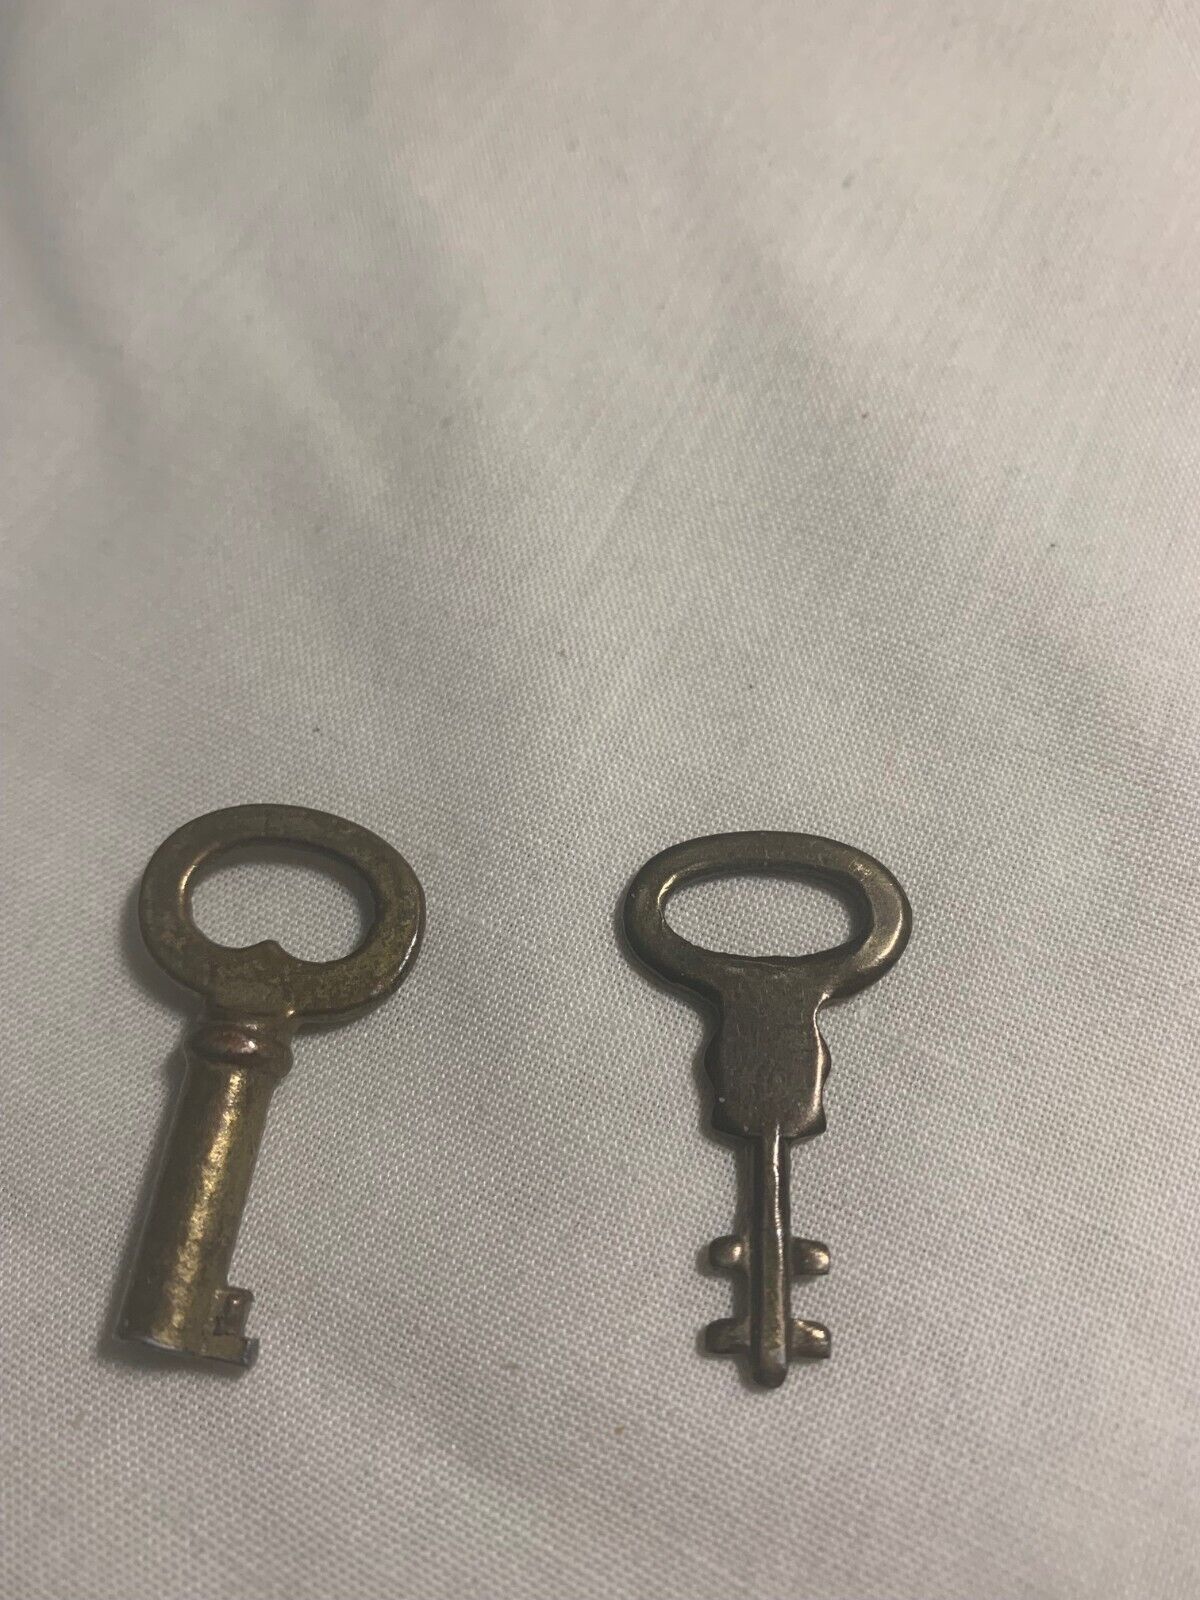 Two small keys, 1 and 1.25 inches long